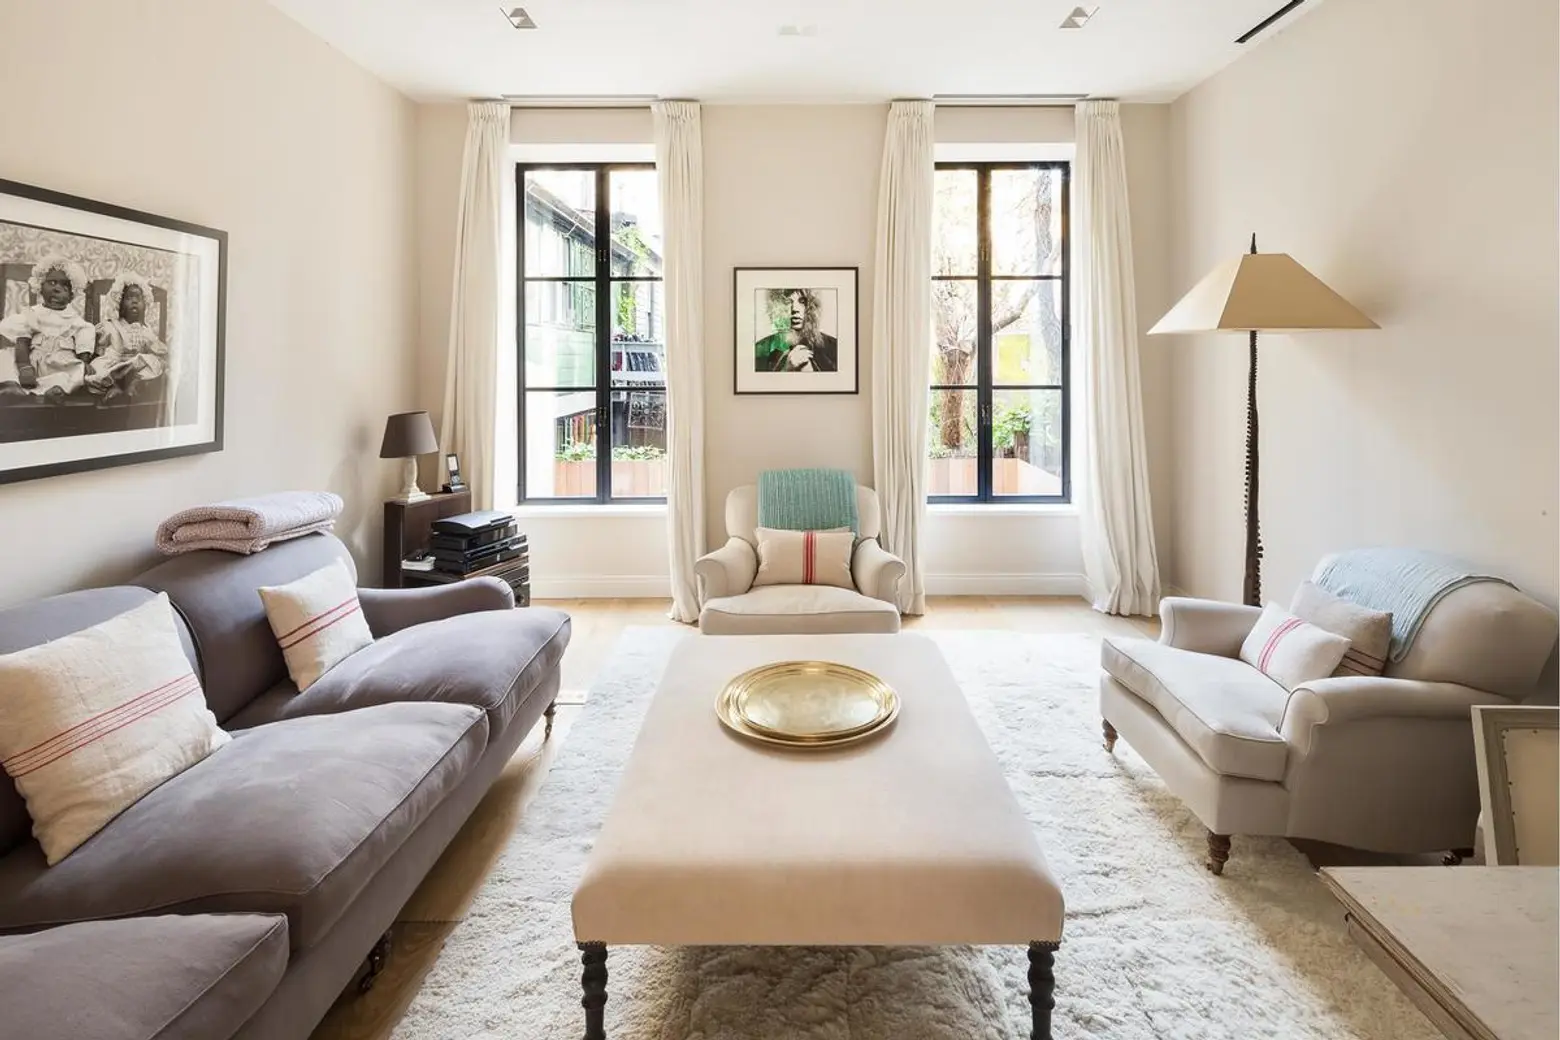 $29K/month West Village townhouse got a modern, romantic renovation by Annabelle Selldorf